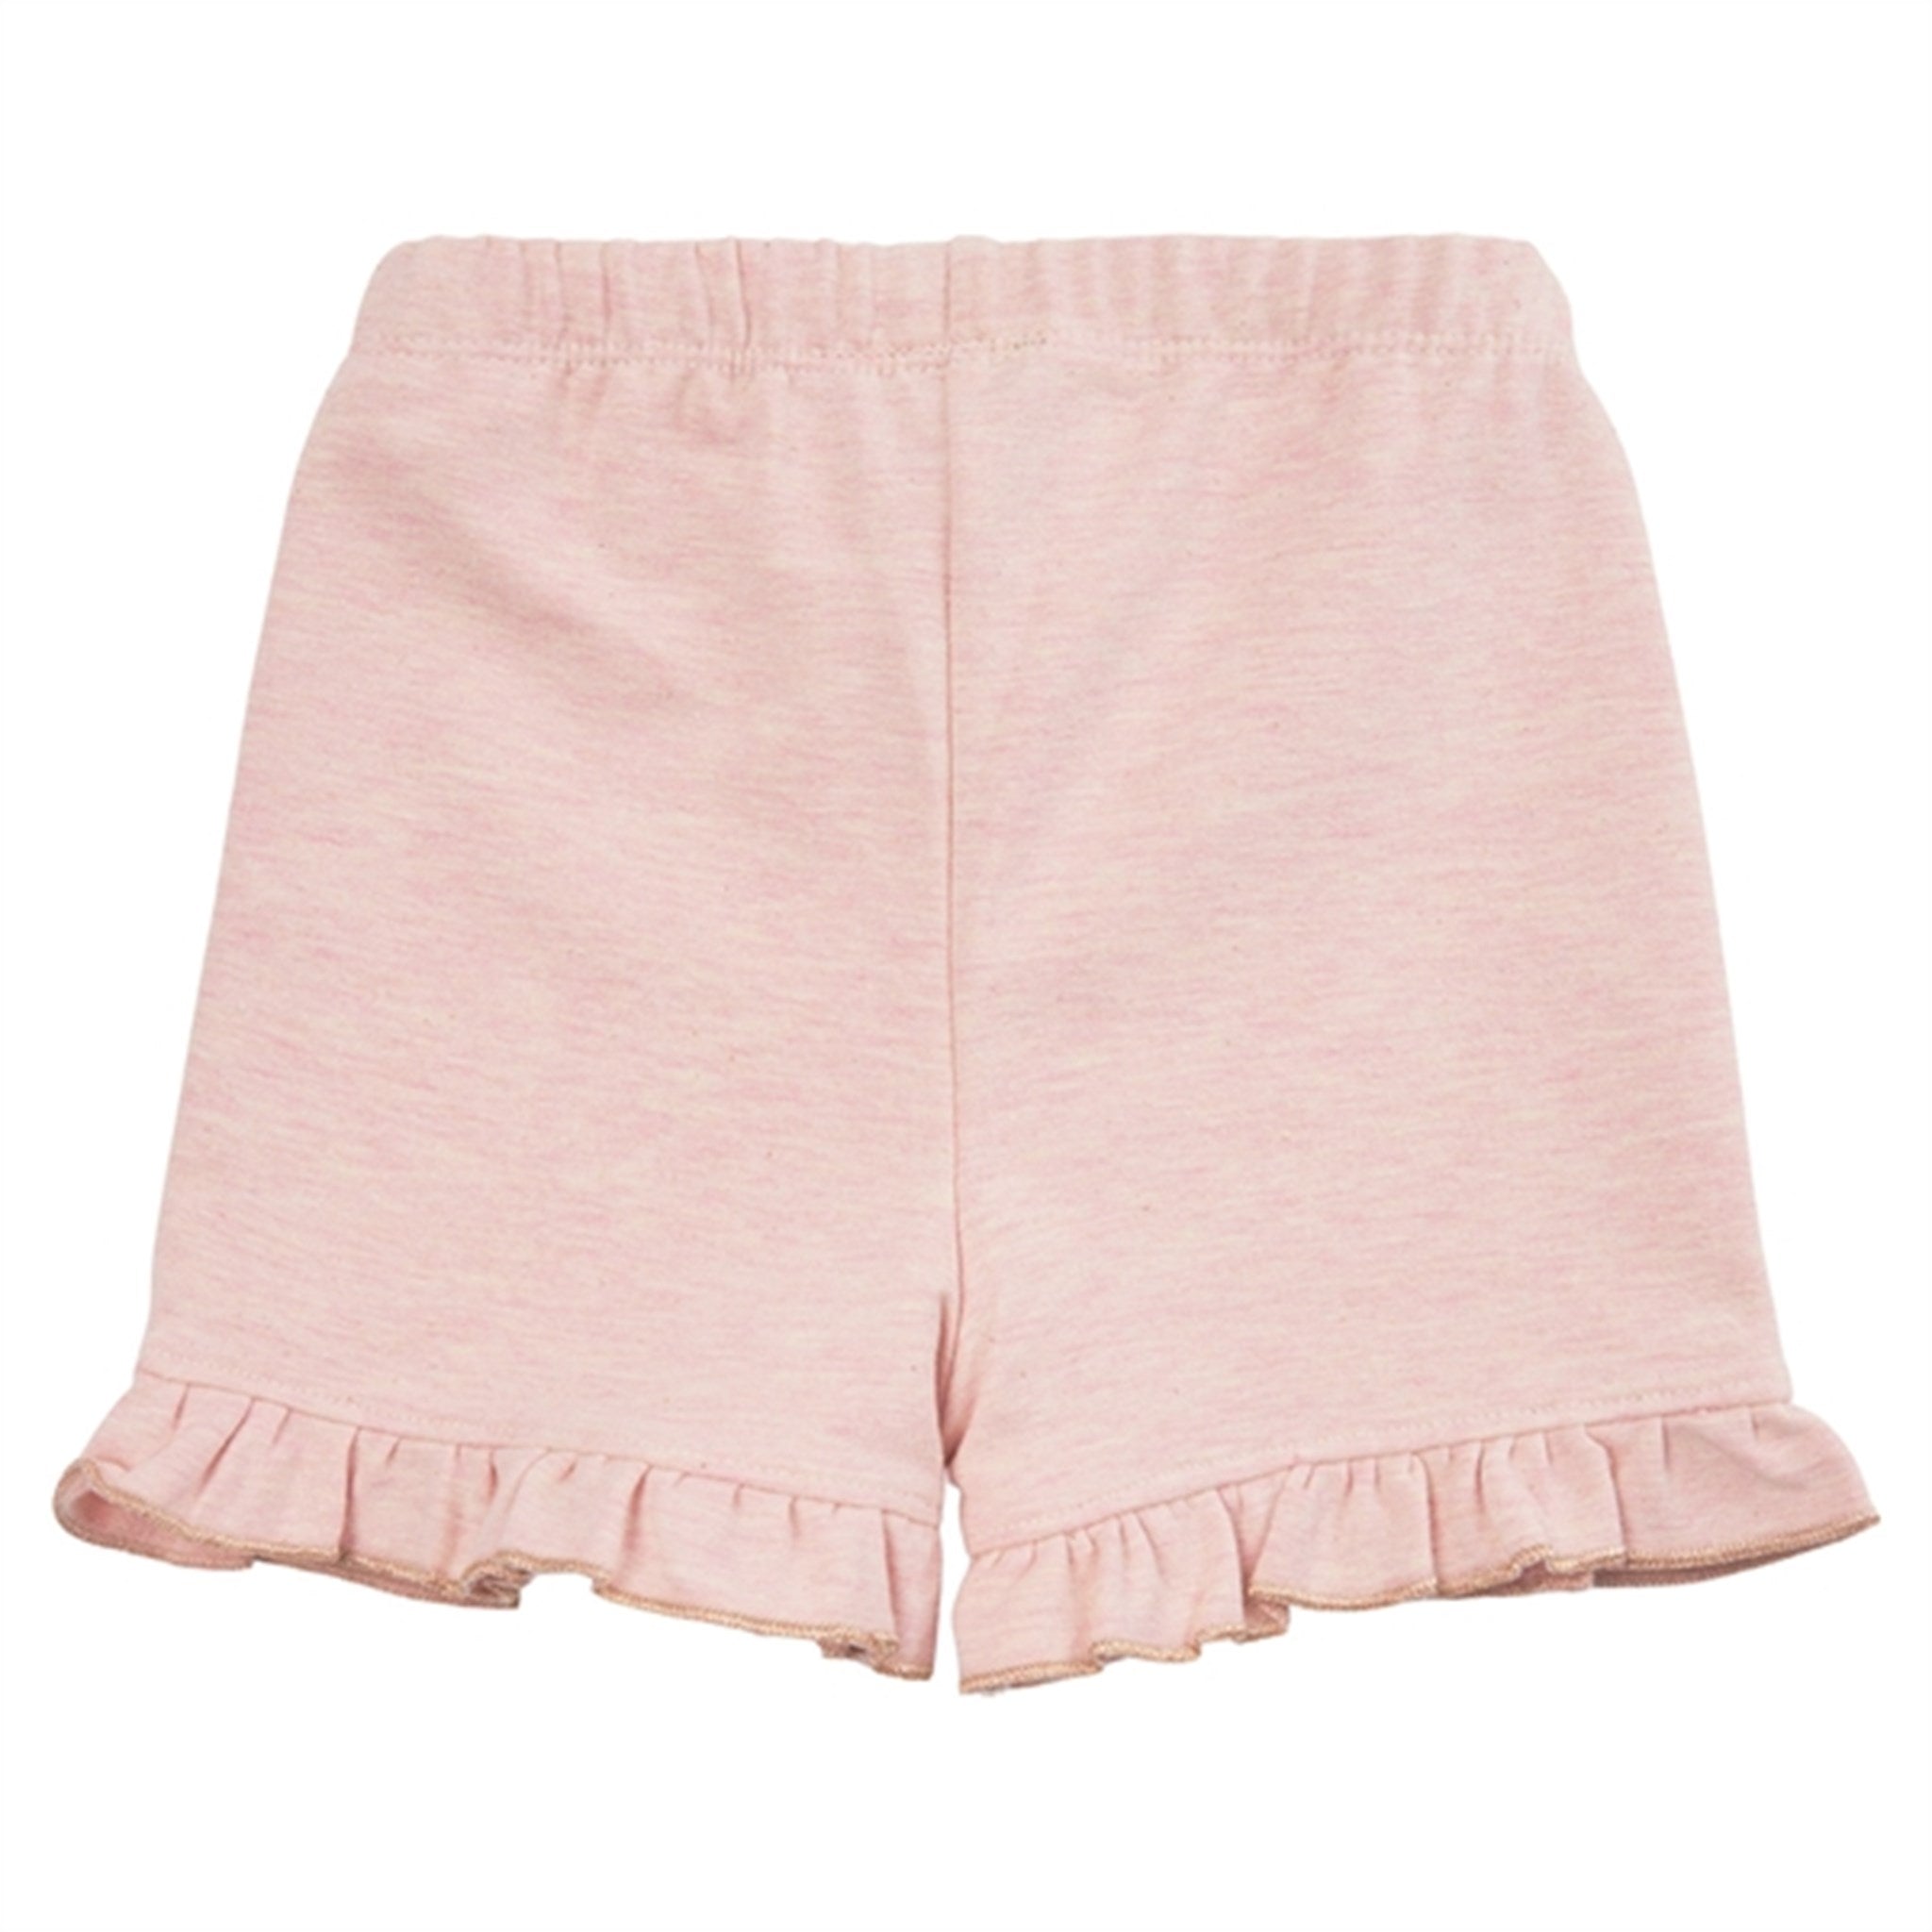 Petit by Sofie Schnoor Rose Blush Shorts 6